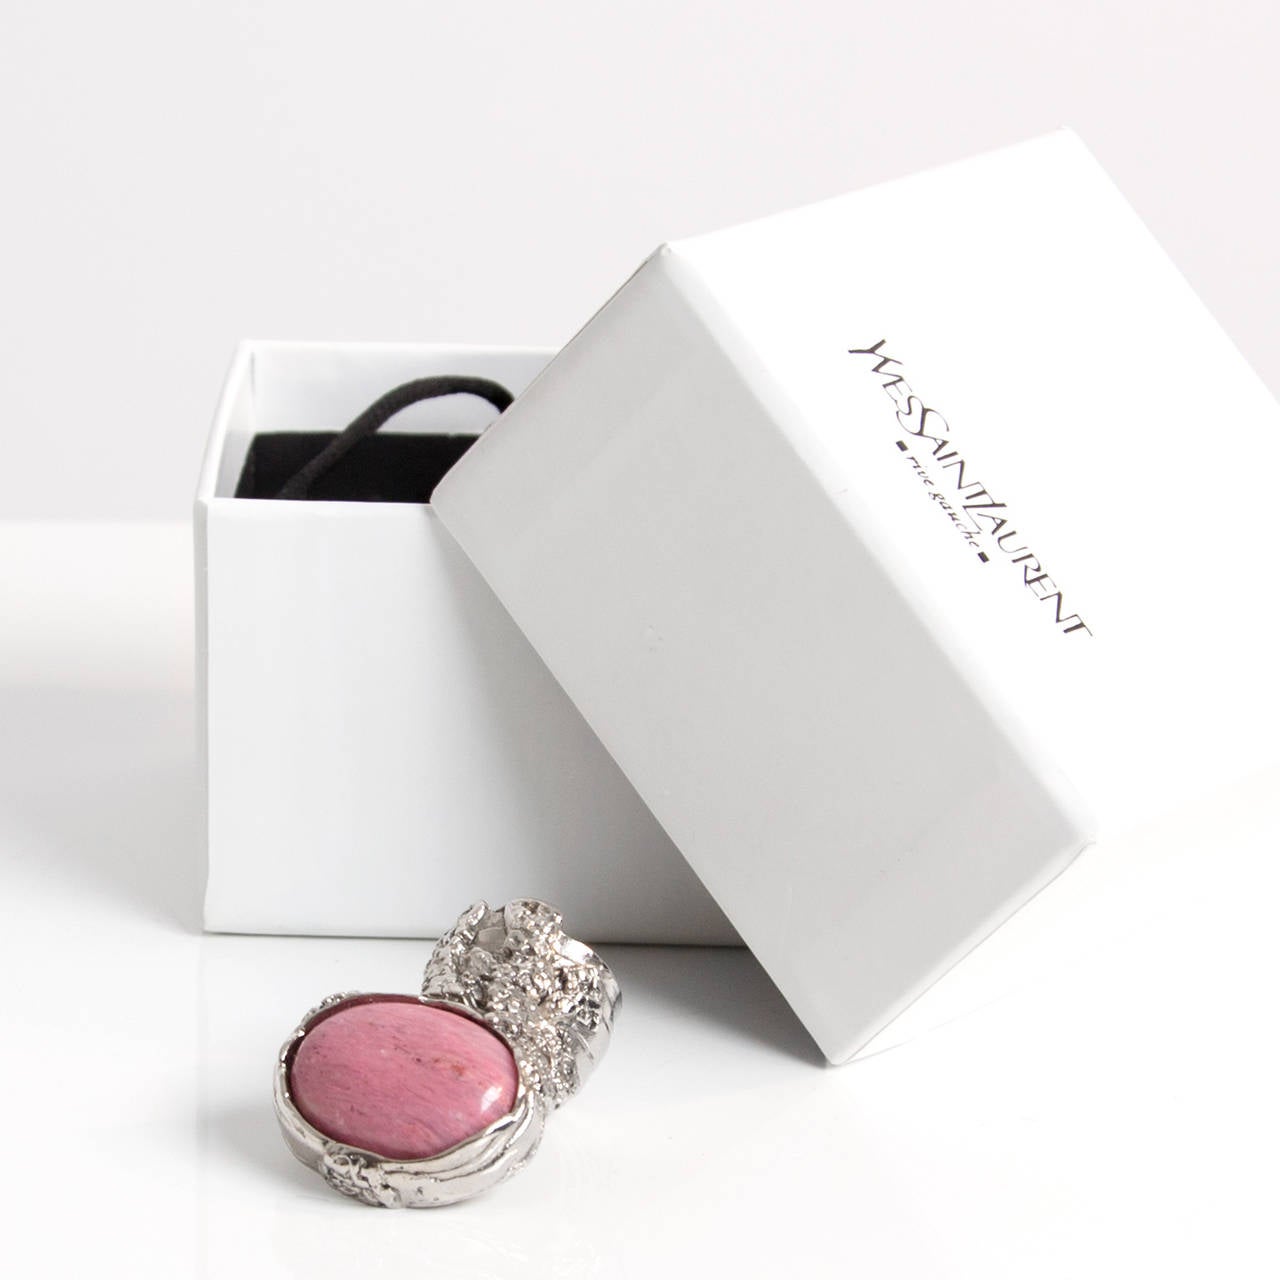 Arty Silver and pink glass ring. 
Yves Saint Laurent reworks its covetable 'Arty' ring with a fresh-hued pink glass stone. Wear it with a boldly printed shirt for a glamorous daytime combination.
size 6